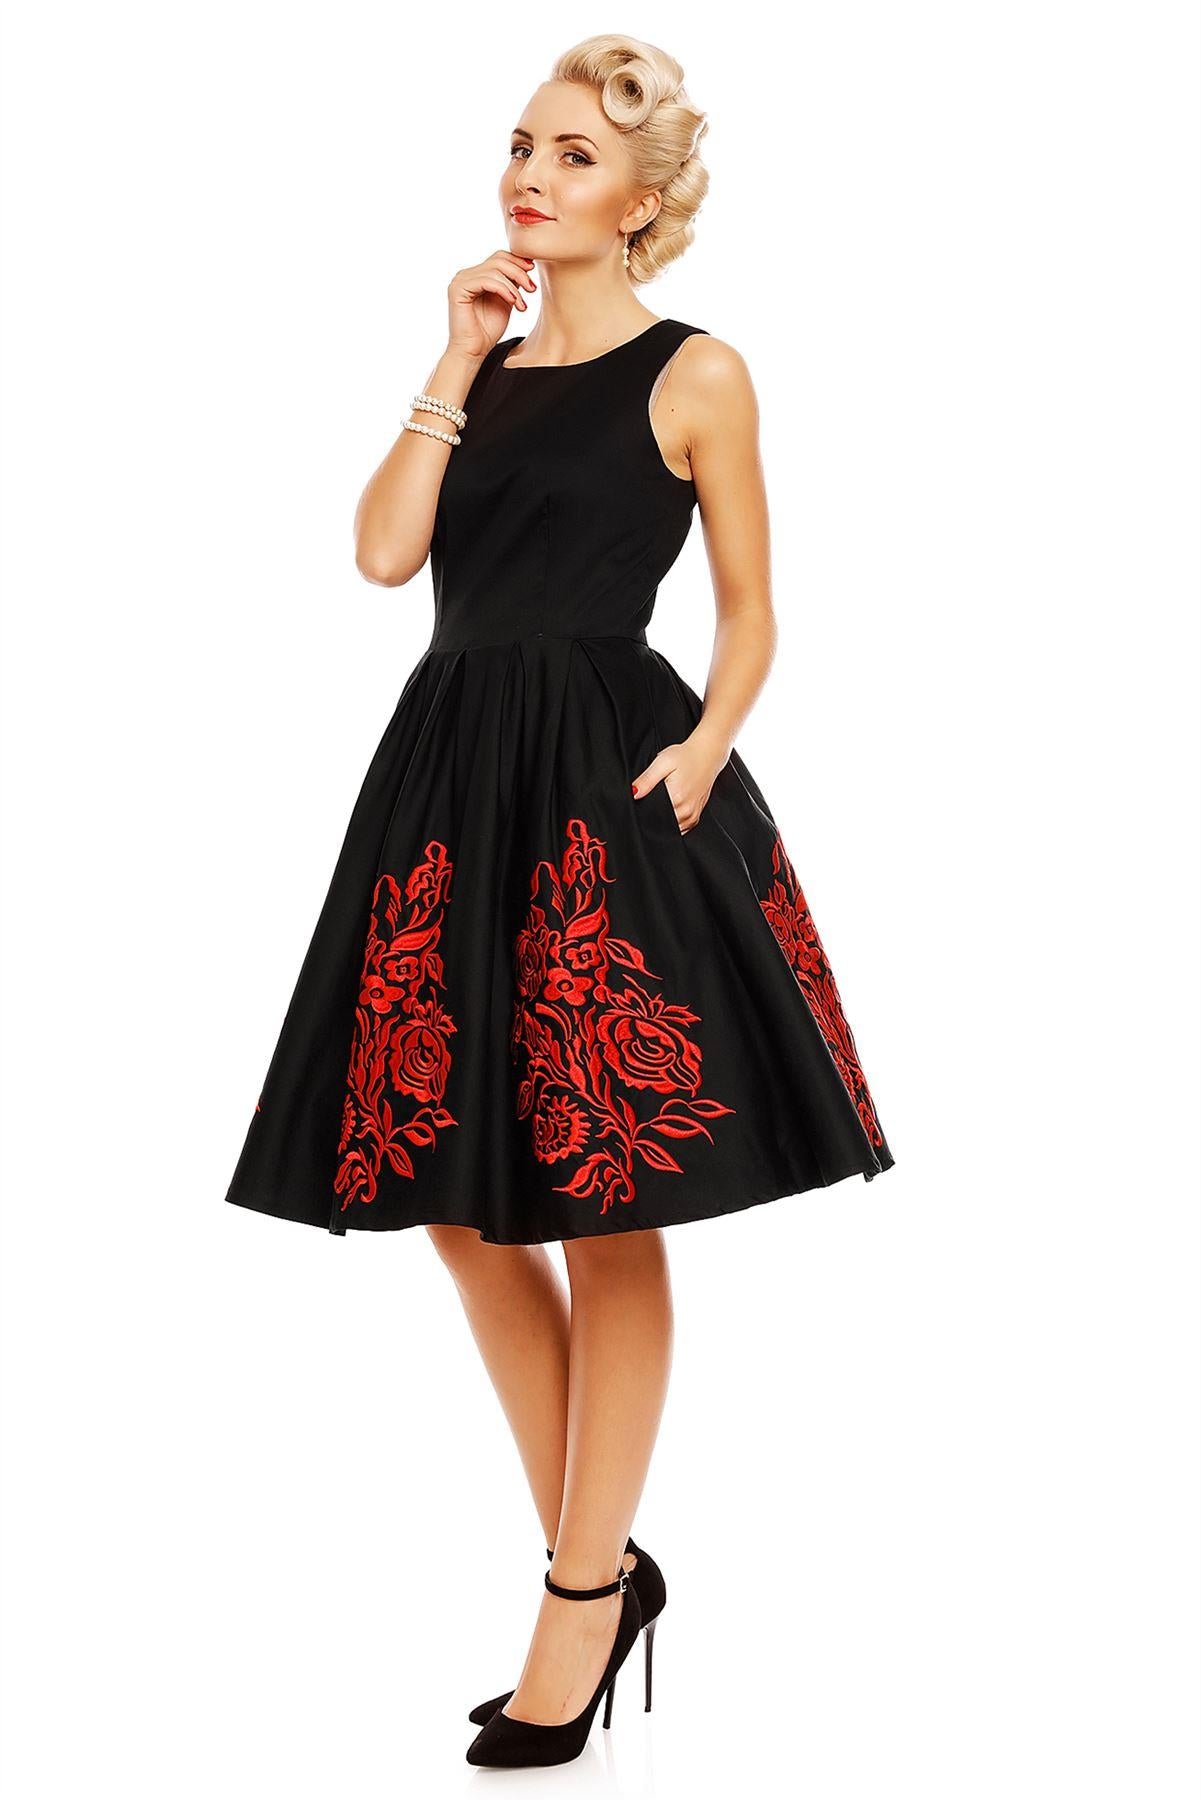 Model wearing Annie Embroidered Roses Swing Dress in Black/Red, side view